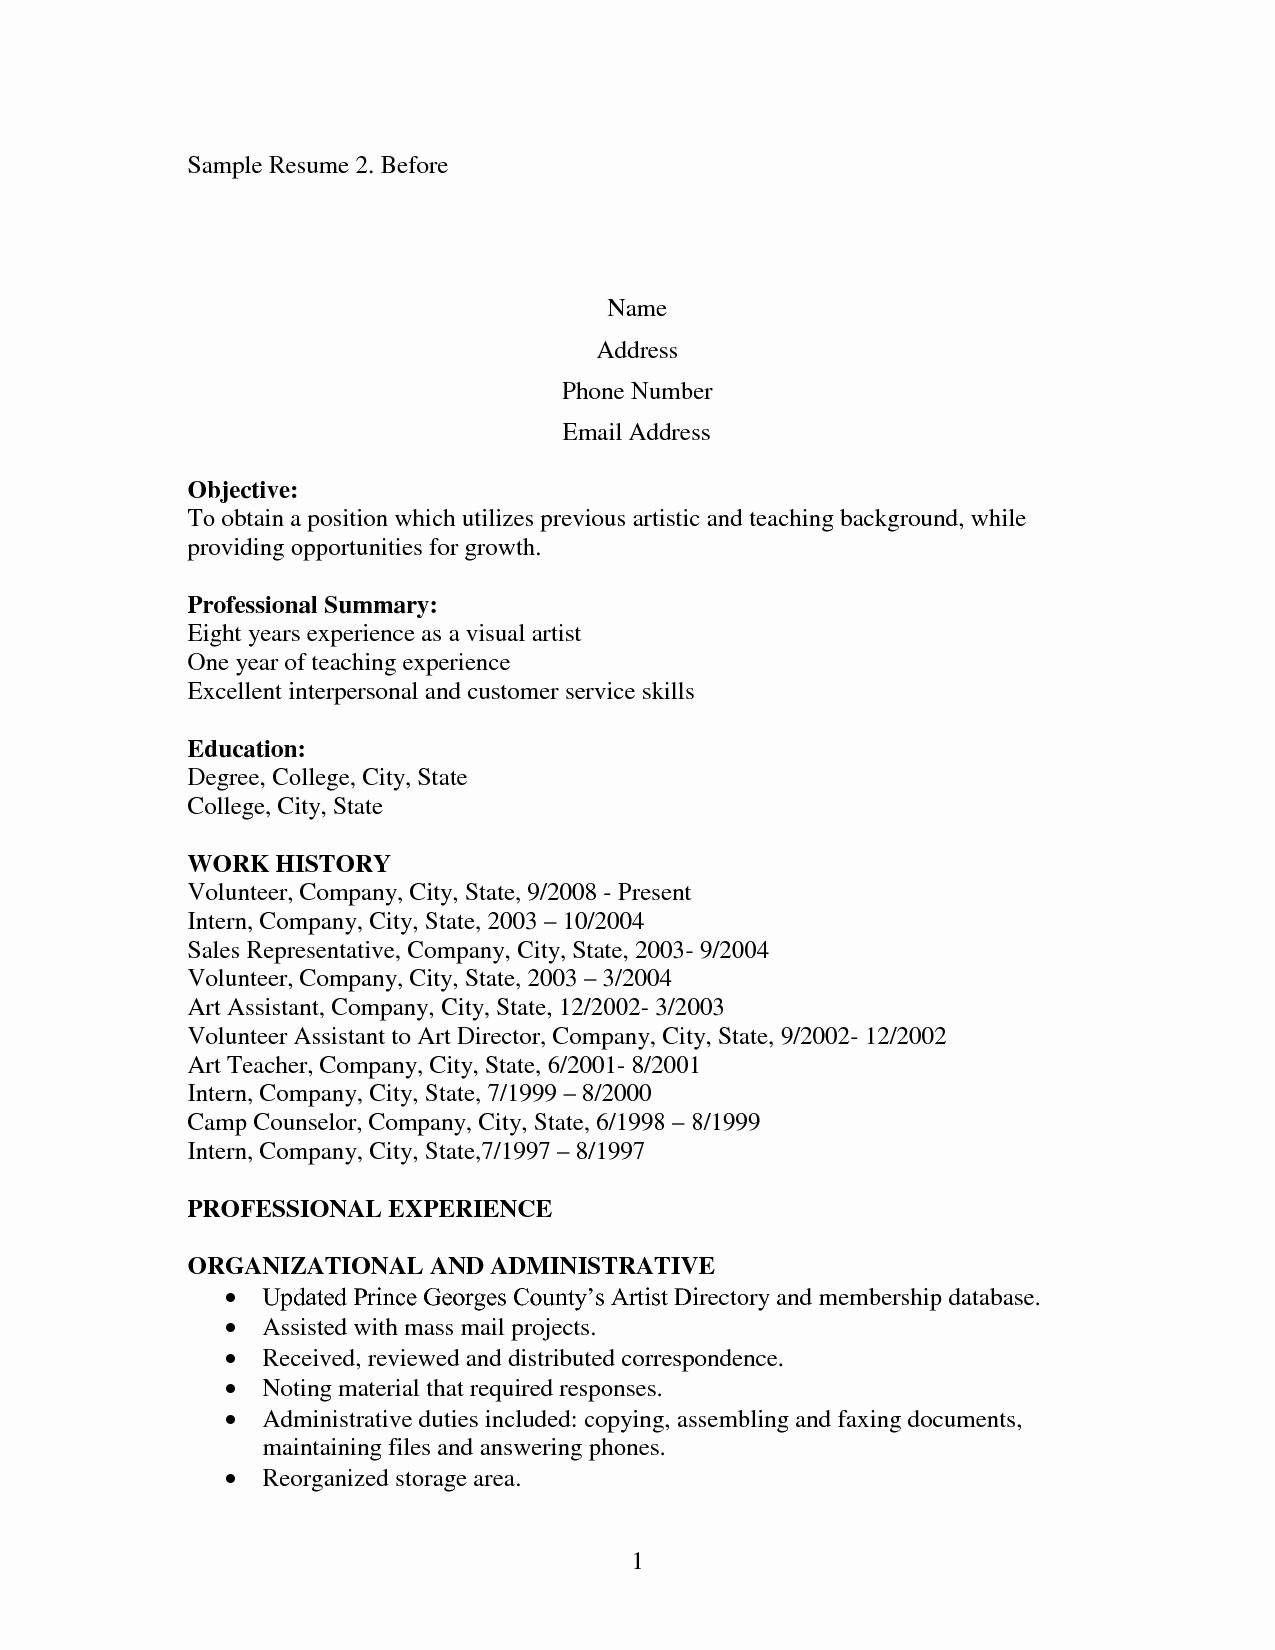 Sample Resume for Housewife with No Work Experience Sample Resume for Housewife Returning to Work Sample Resume for …